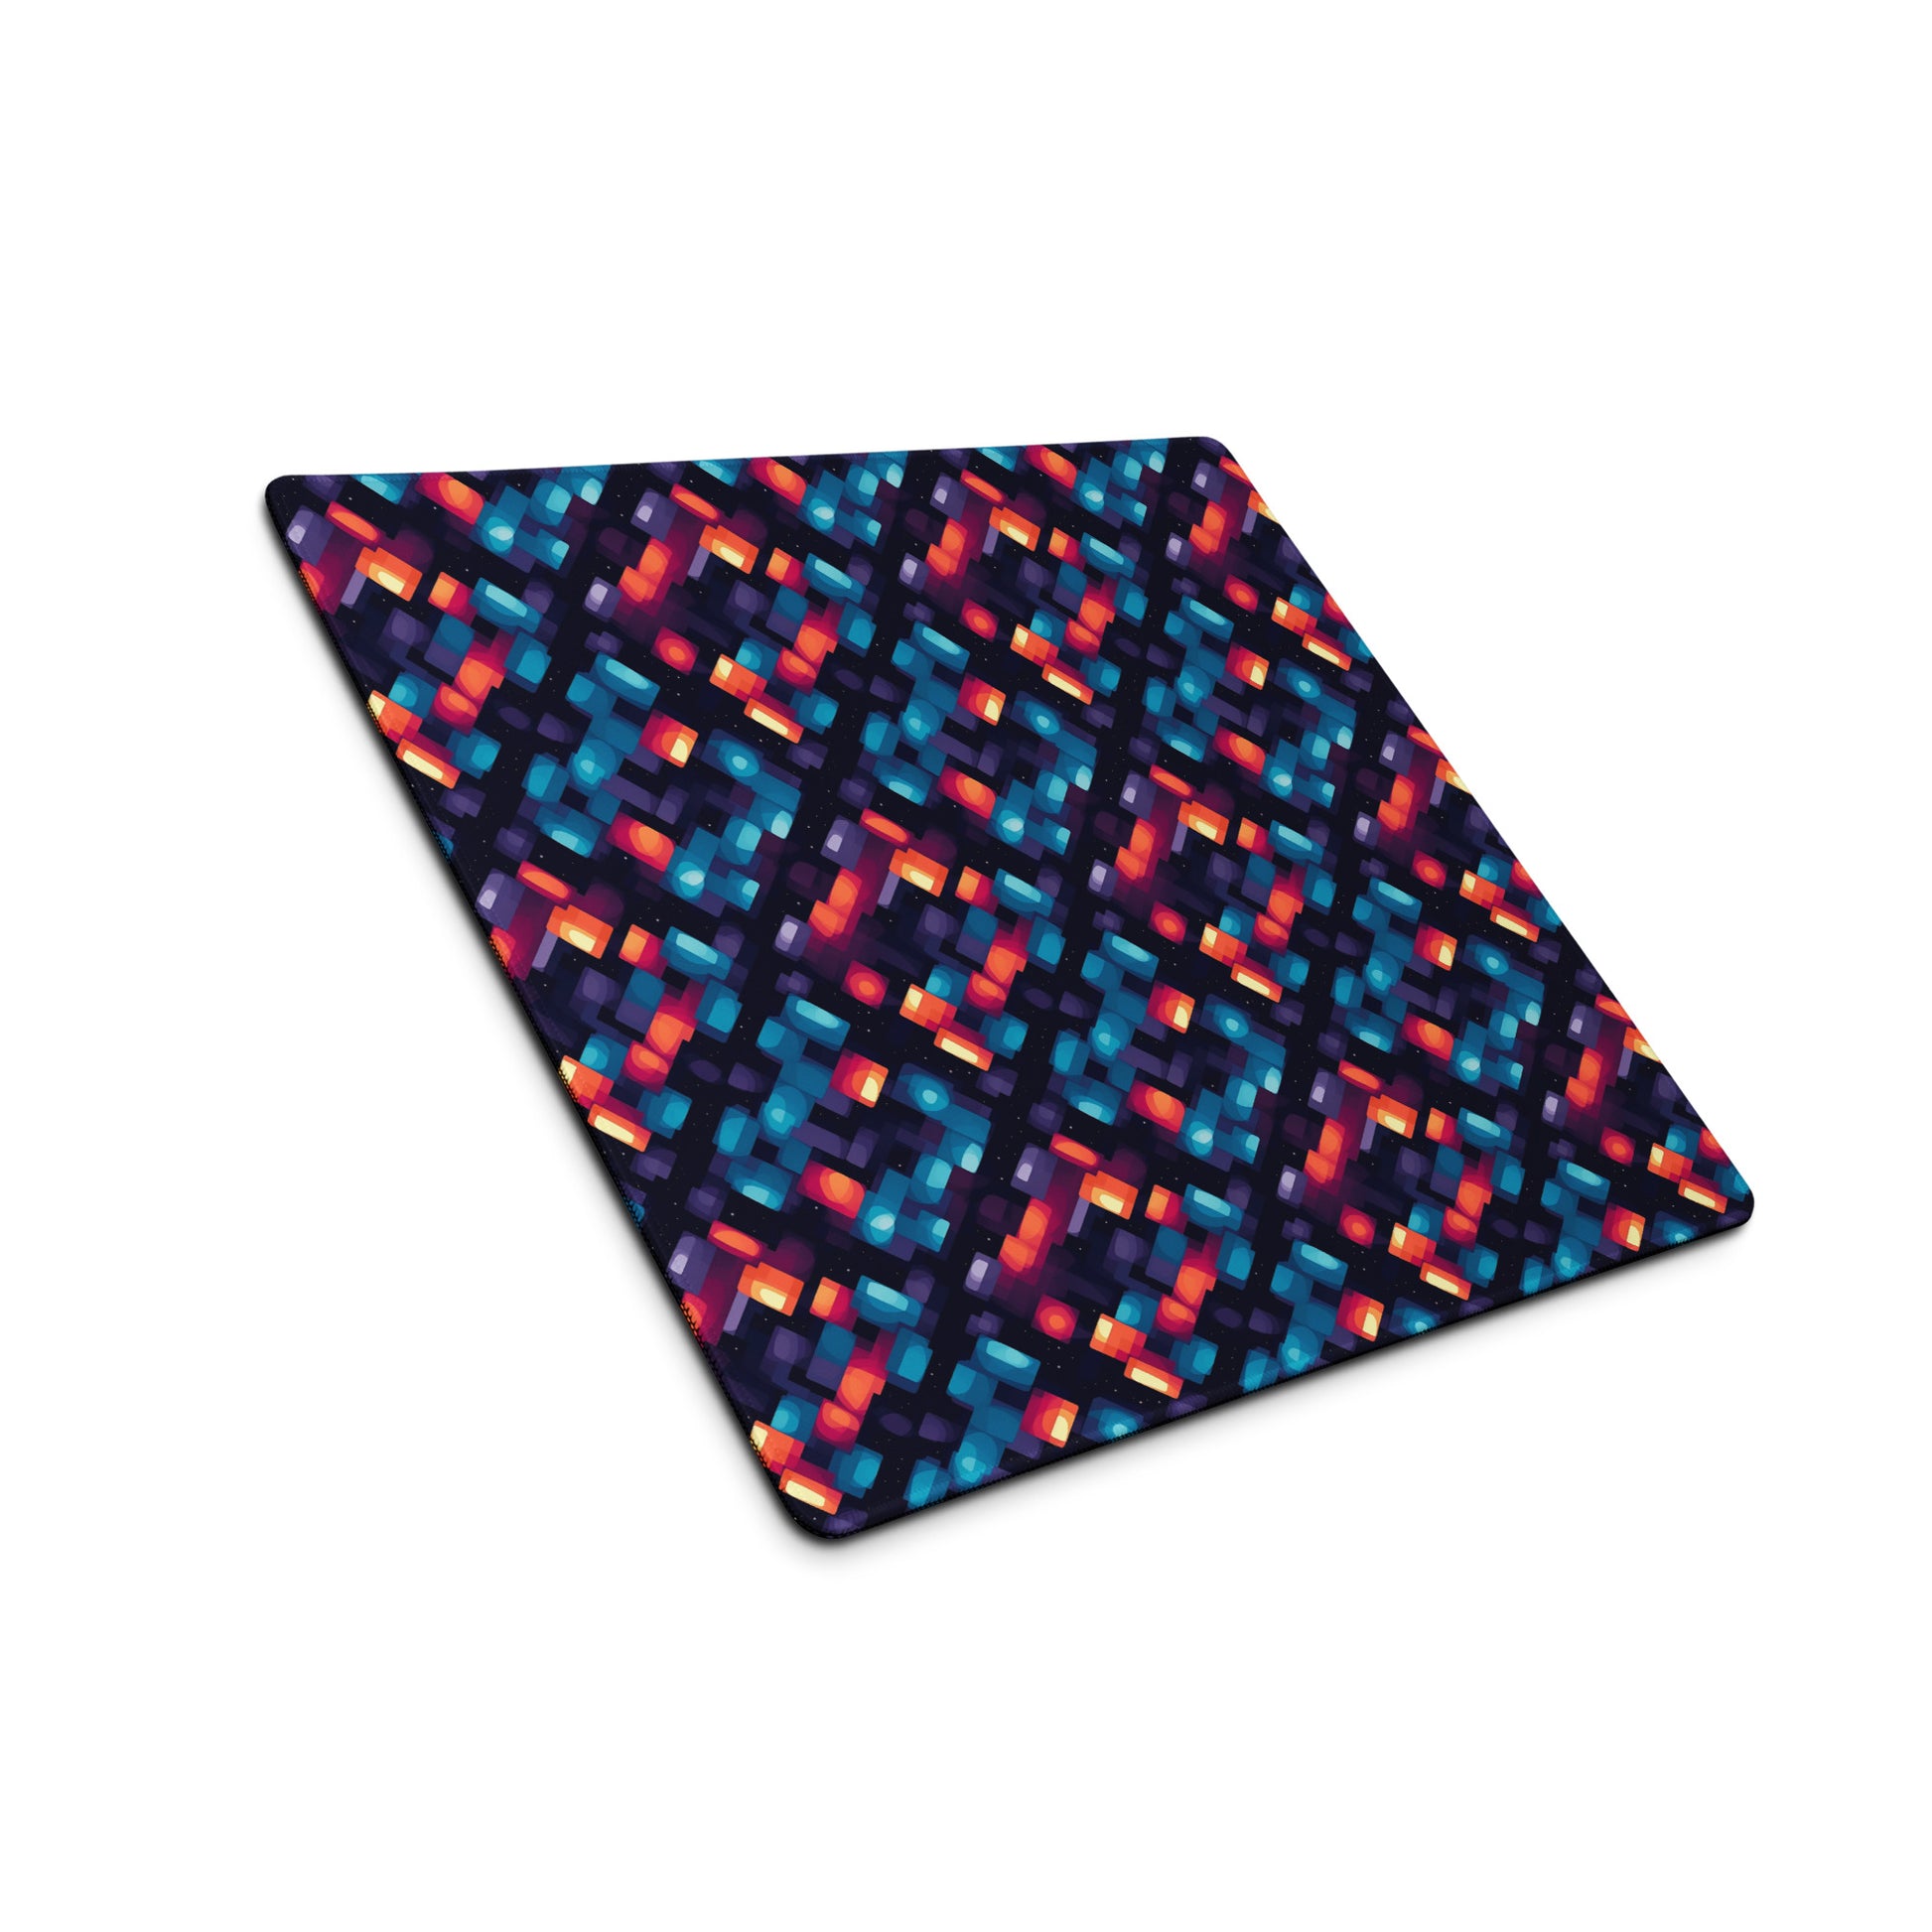 alt text- A 18" x 16" desk pad with blue and orange abstract pattern sitting at an angle.